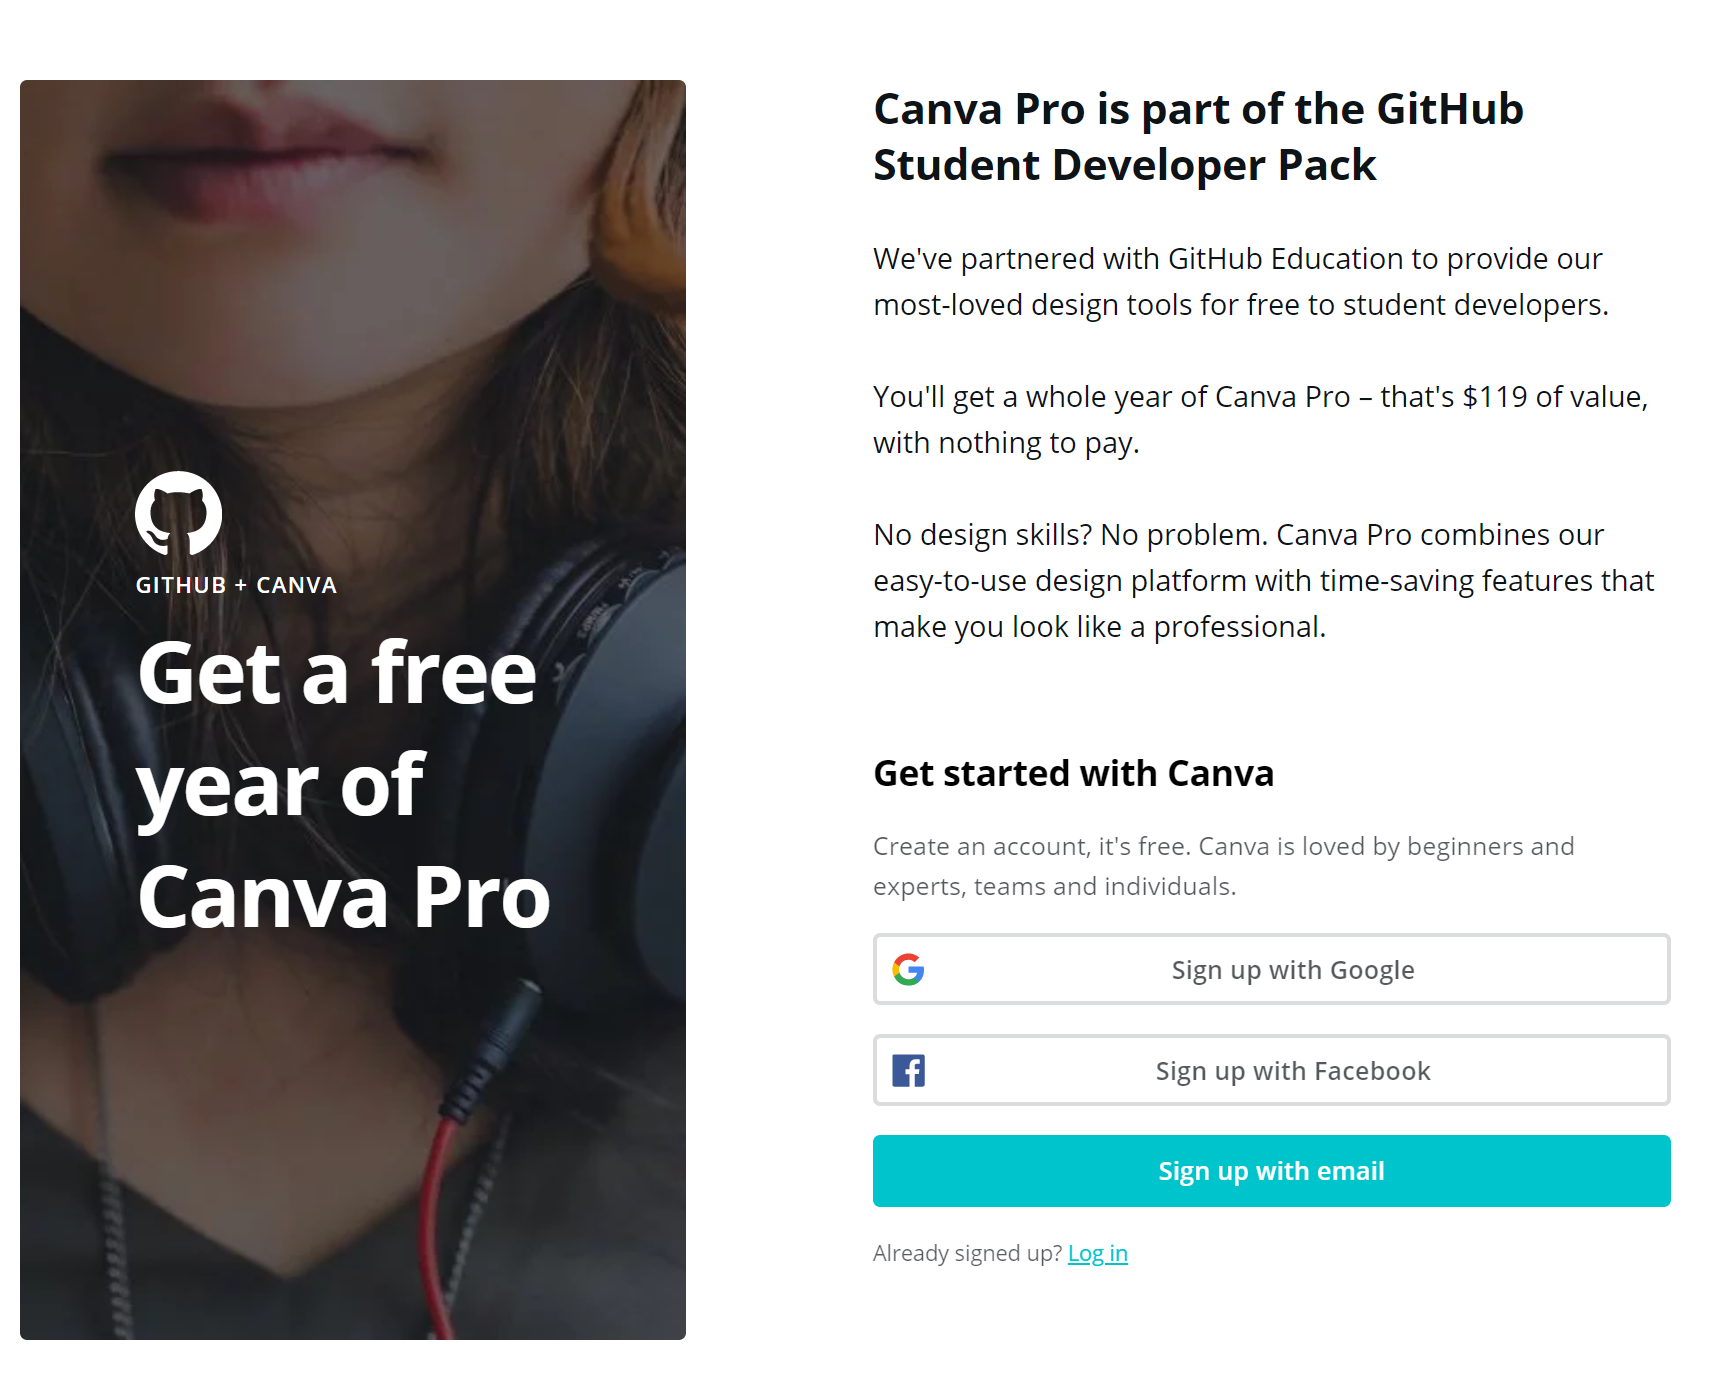 Canva Pro free for a year for GitHub Student Developer Education Pack